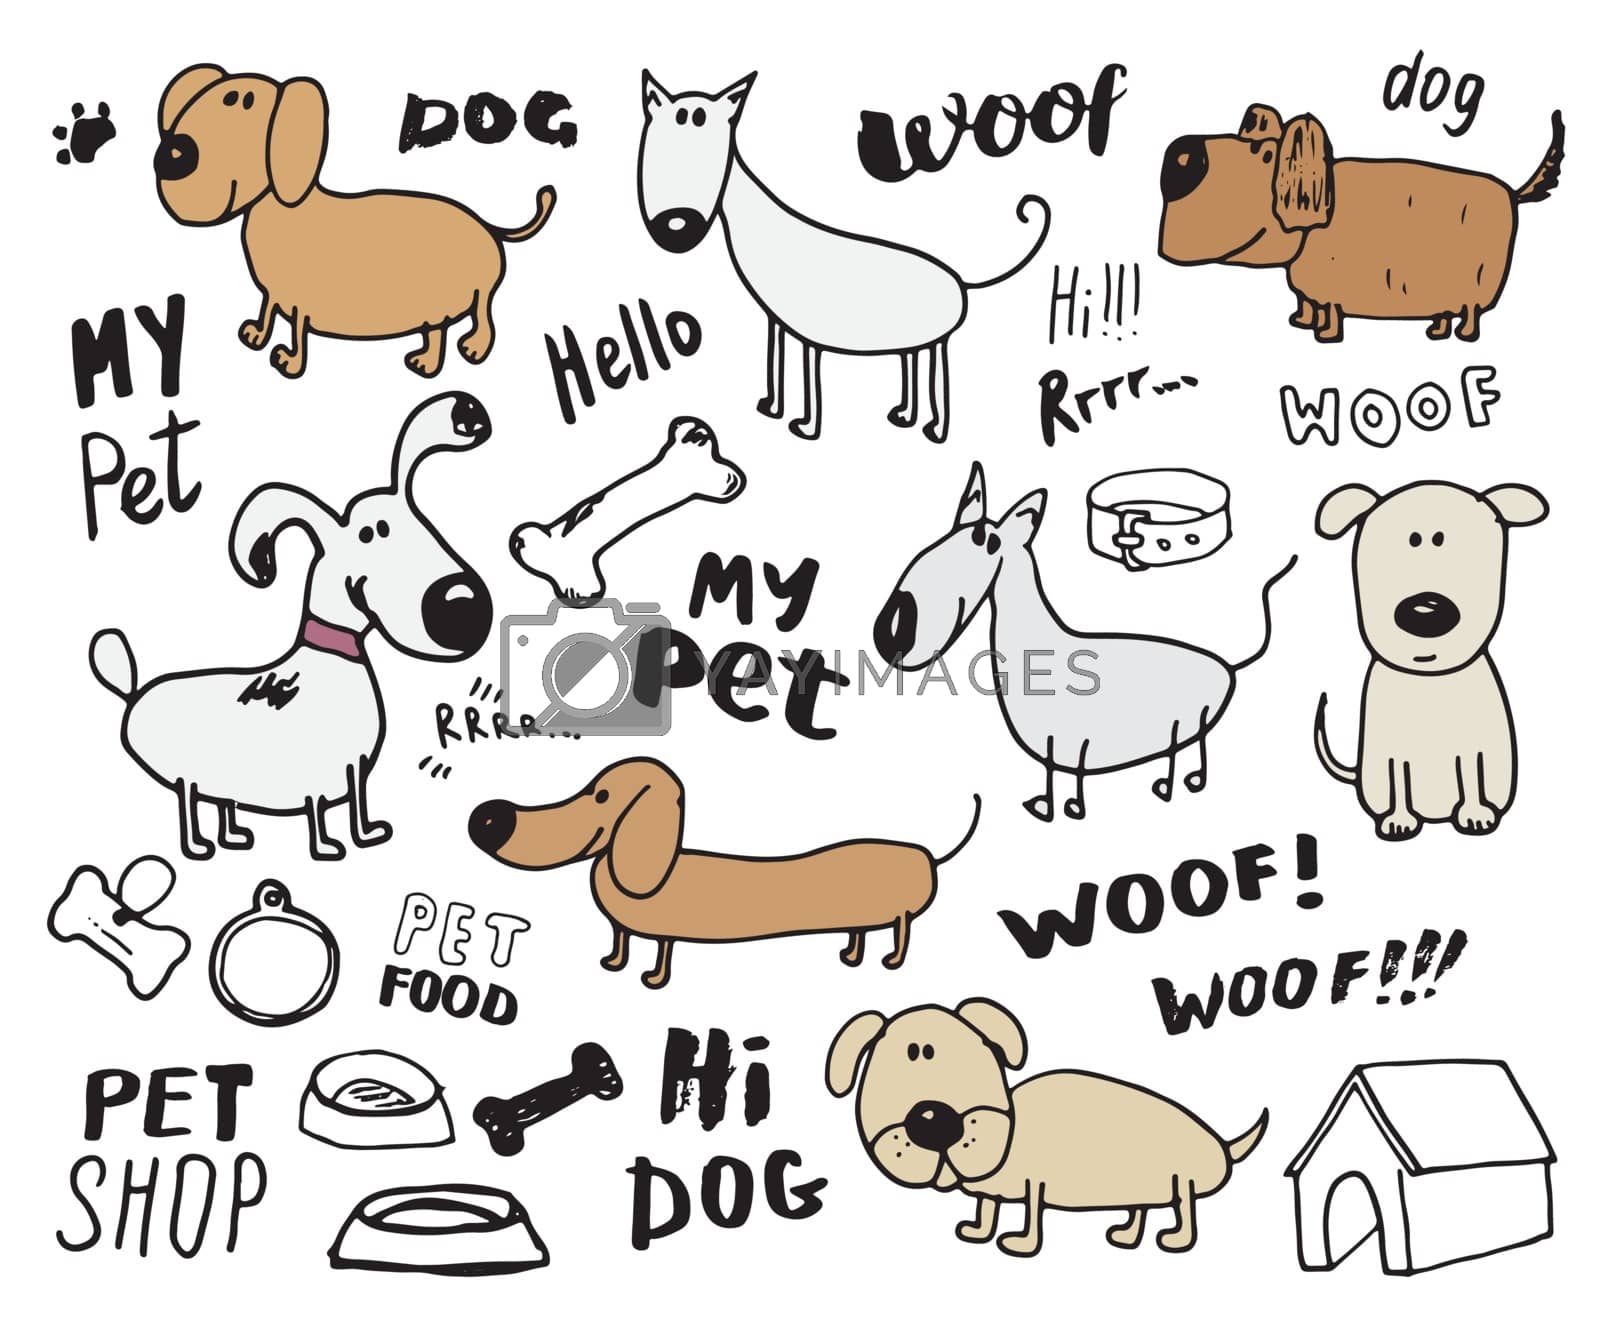 Funny Dogs doodle Set. Hand drawn sketched pets collection Vector Illustration on white background.